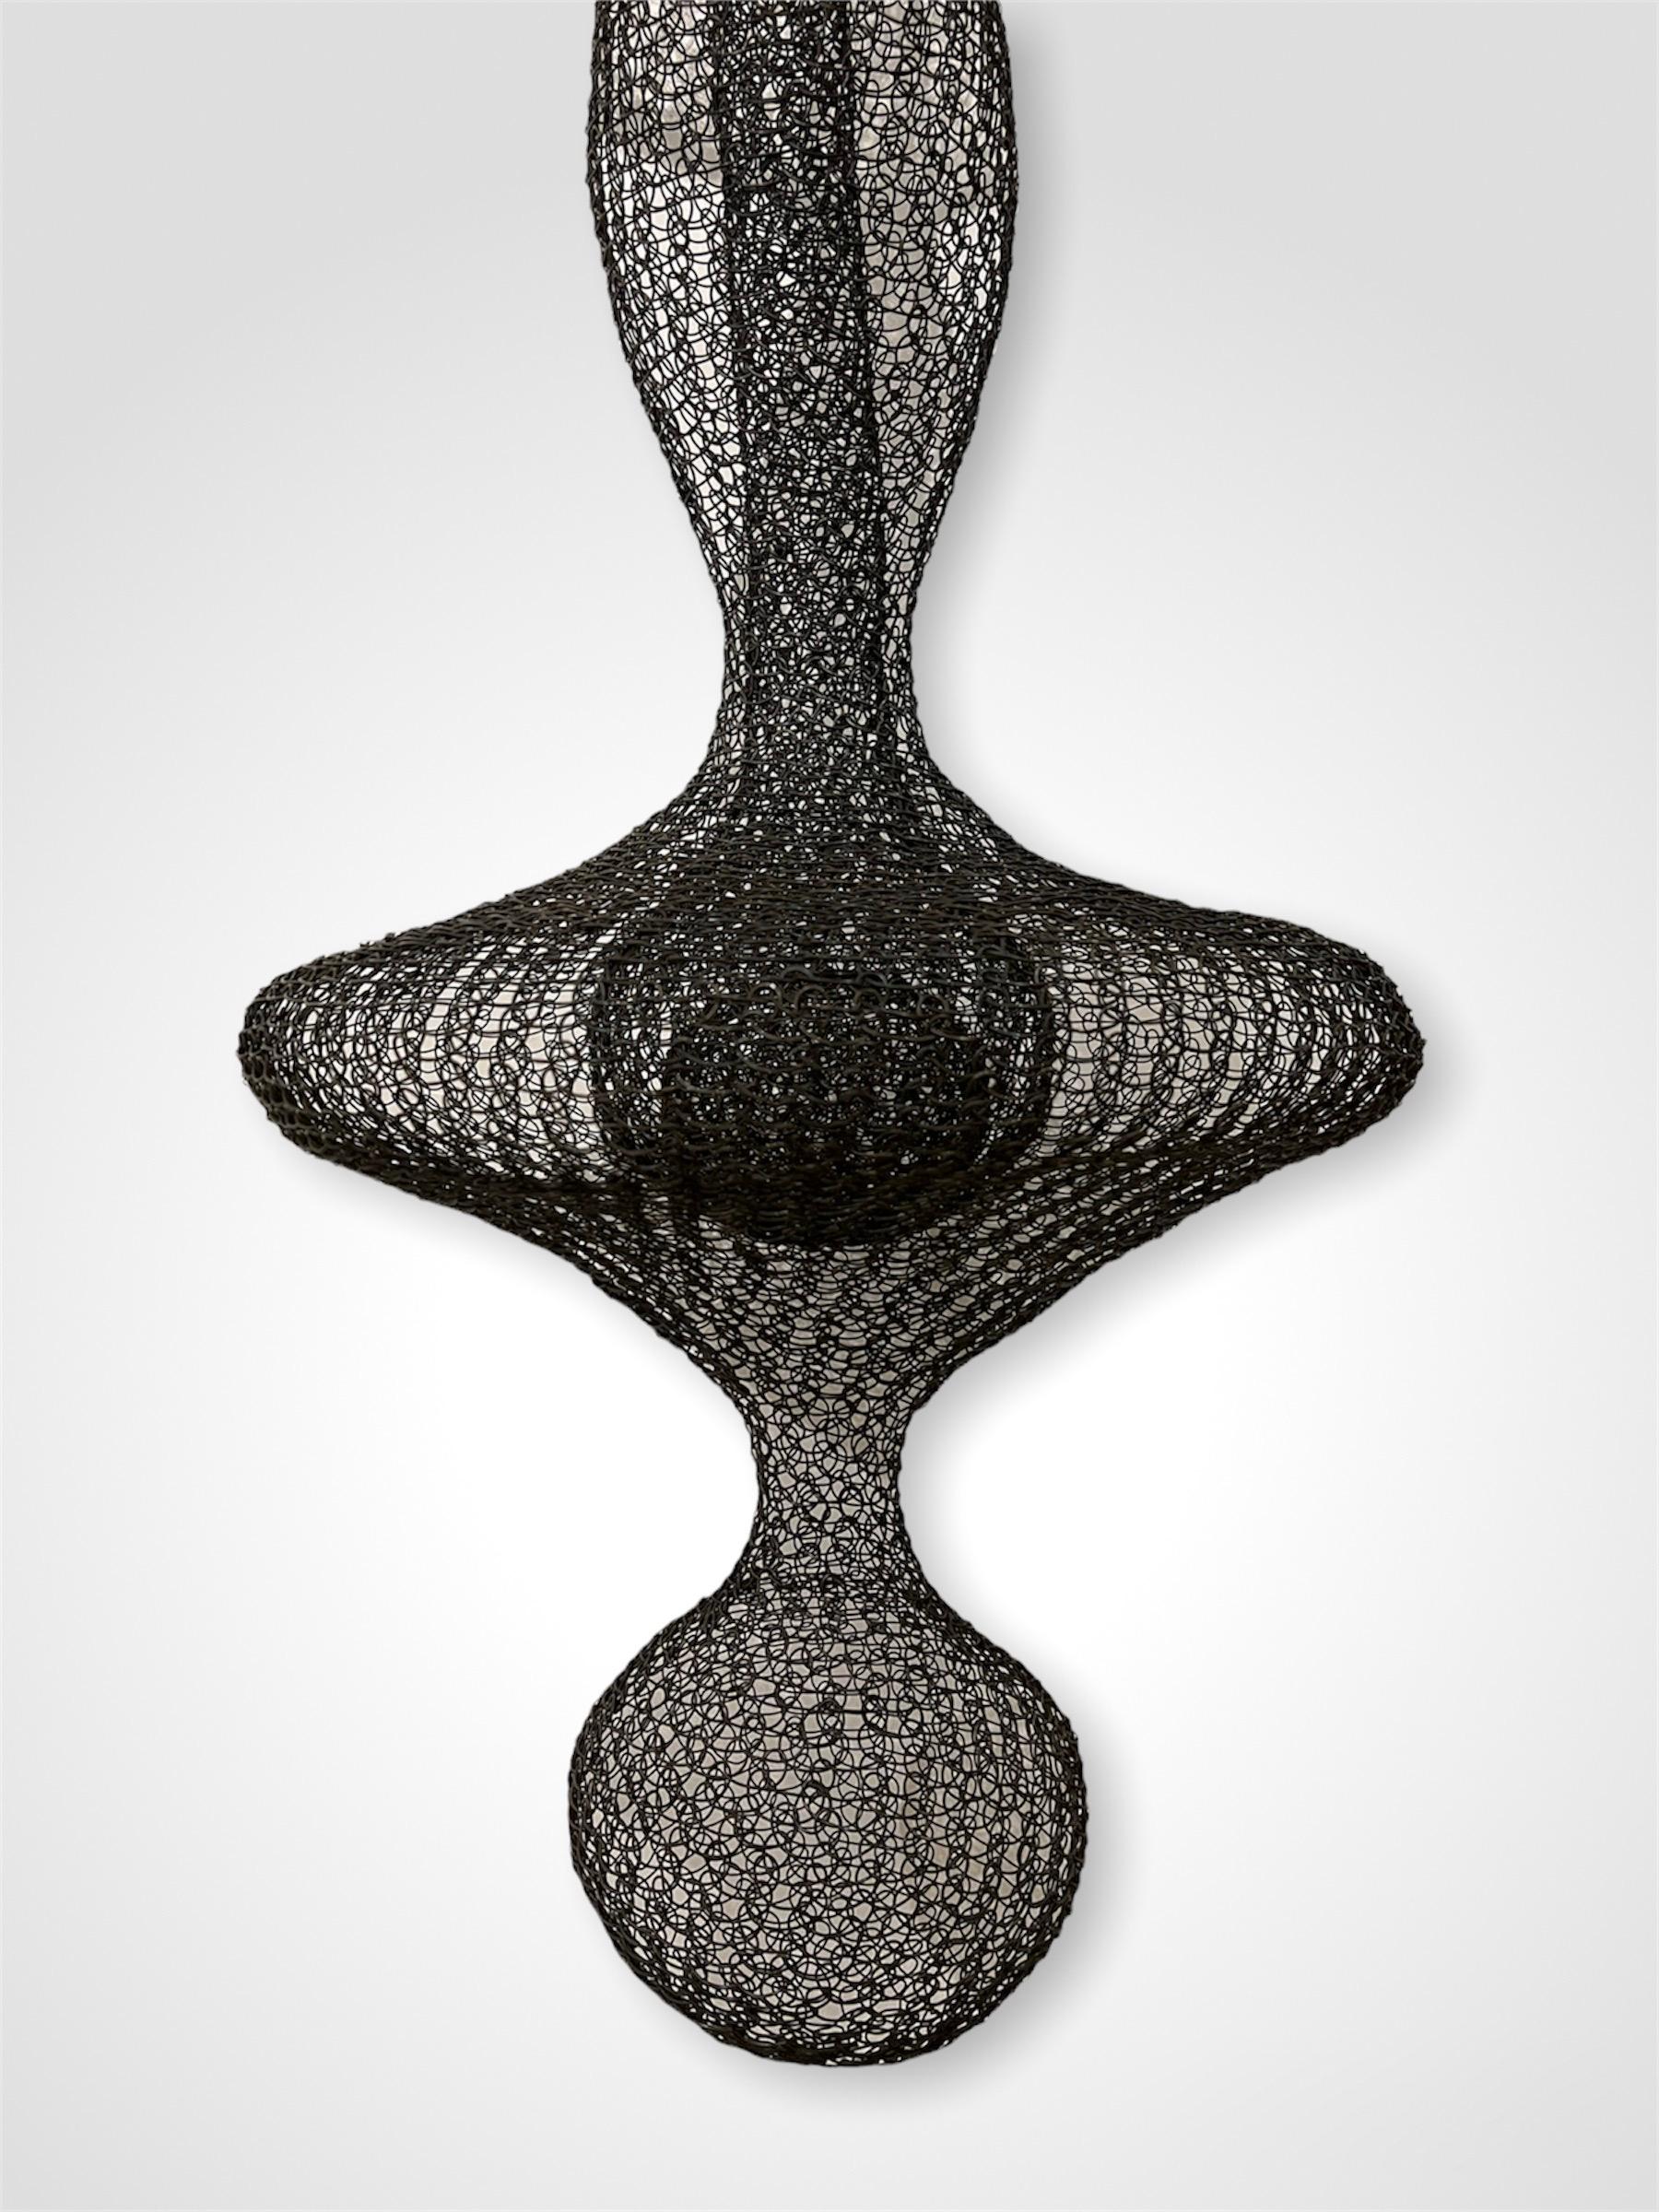 Organic hand woven mesh wire sculpture by Ulrikk Dufosse. Very collectable, from Paris, France.
